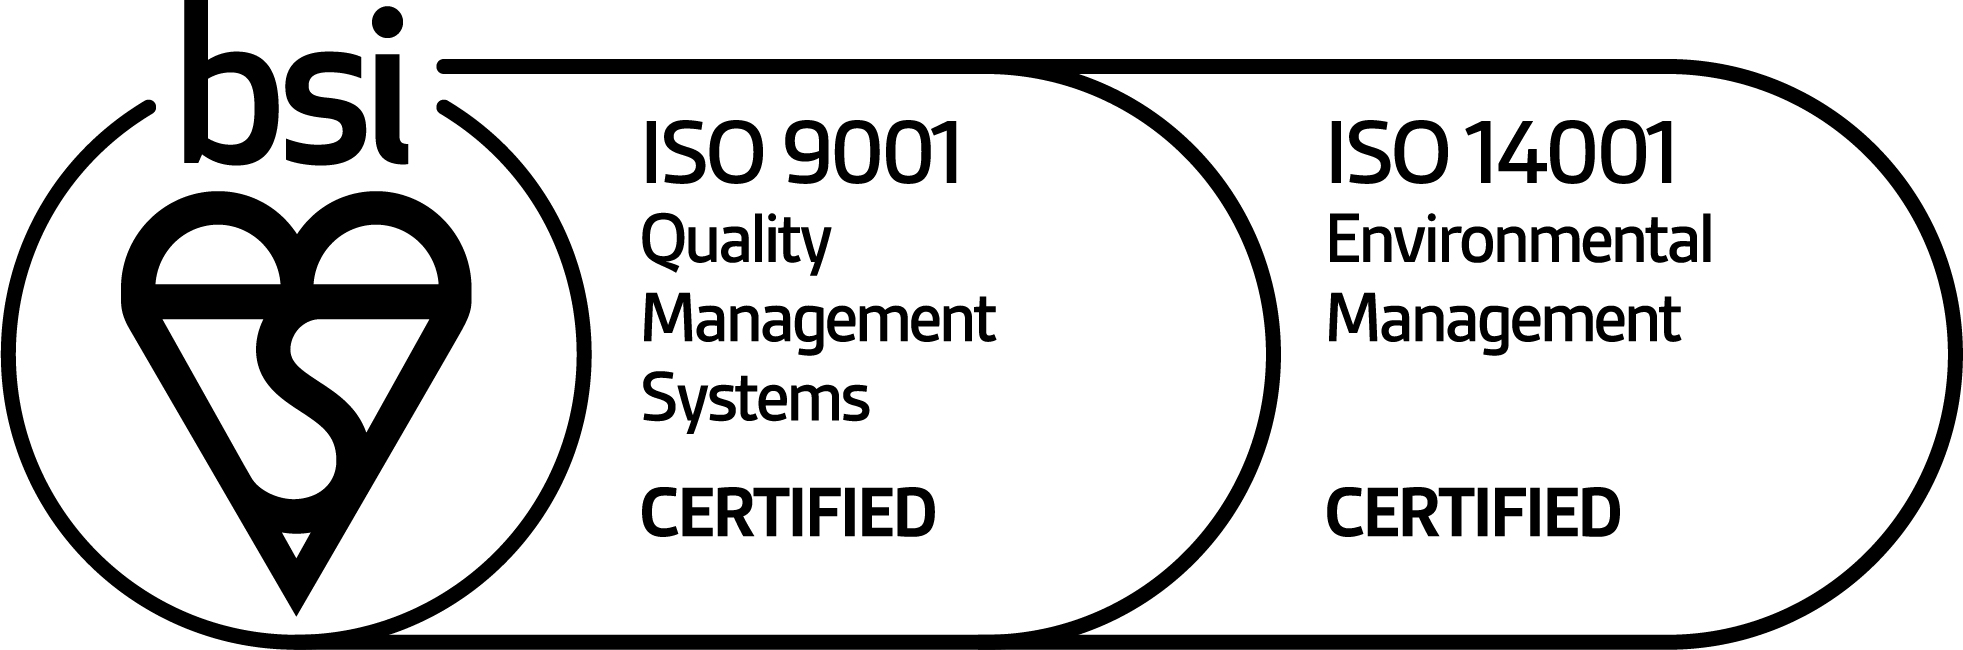 ISO 14001 Certification: A Win for Customers and the Environment